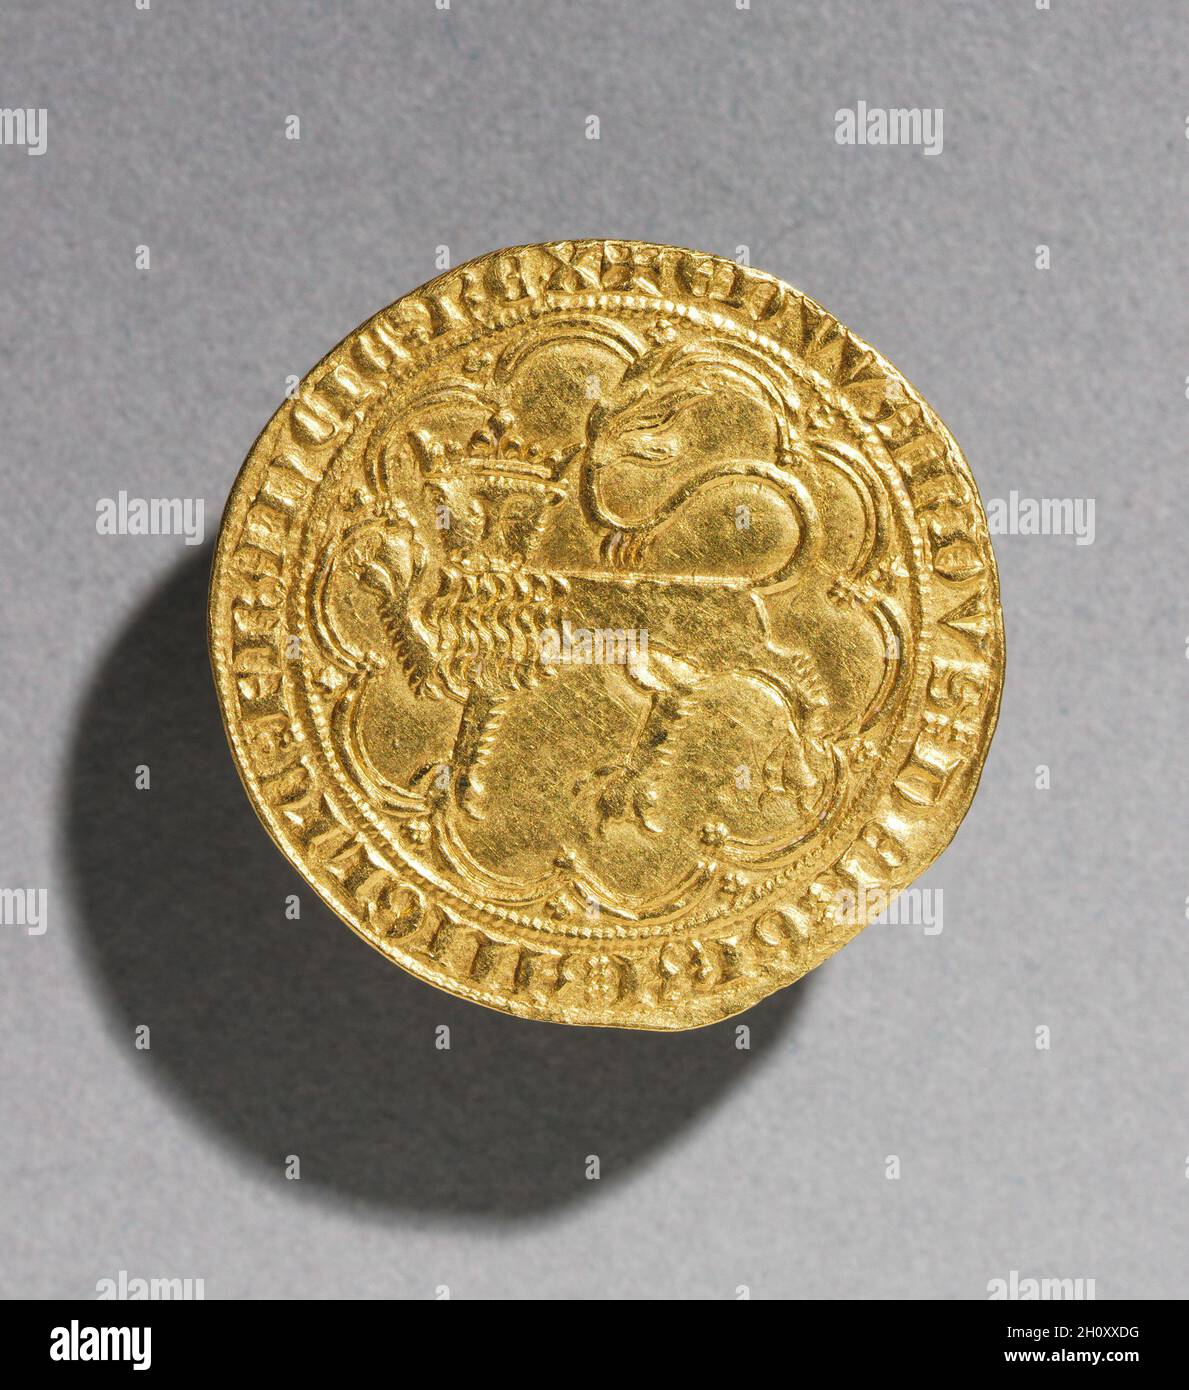 Leopard d'Or of Edward III of England (obverse), 1327-1377. England, Anglo-Gallic, Gothic period, 14th century. Gold; diameter: 3.4 cm (1 5/16 in.).  Known as a 'Golden Leopard' because of the crowned leopard on one side, this gold coin was minted for Edward III, king of England and France. Stock Photo